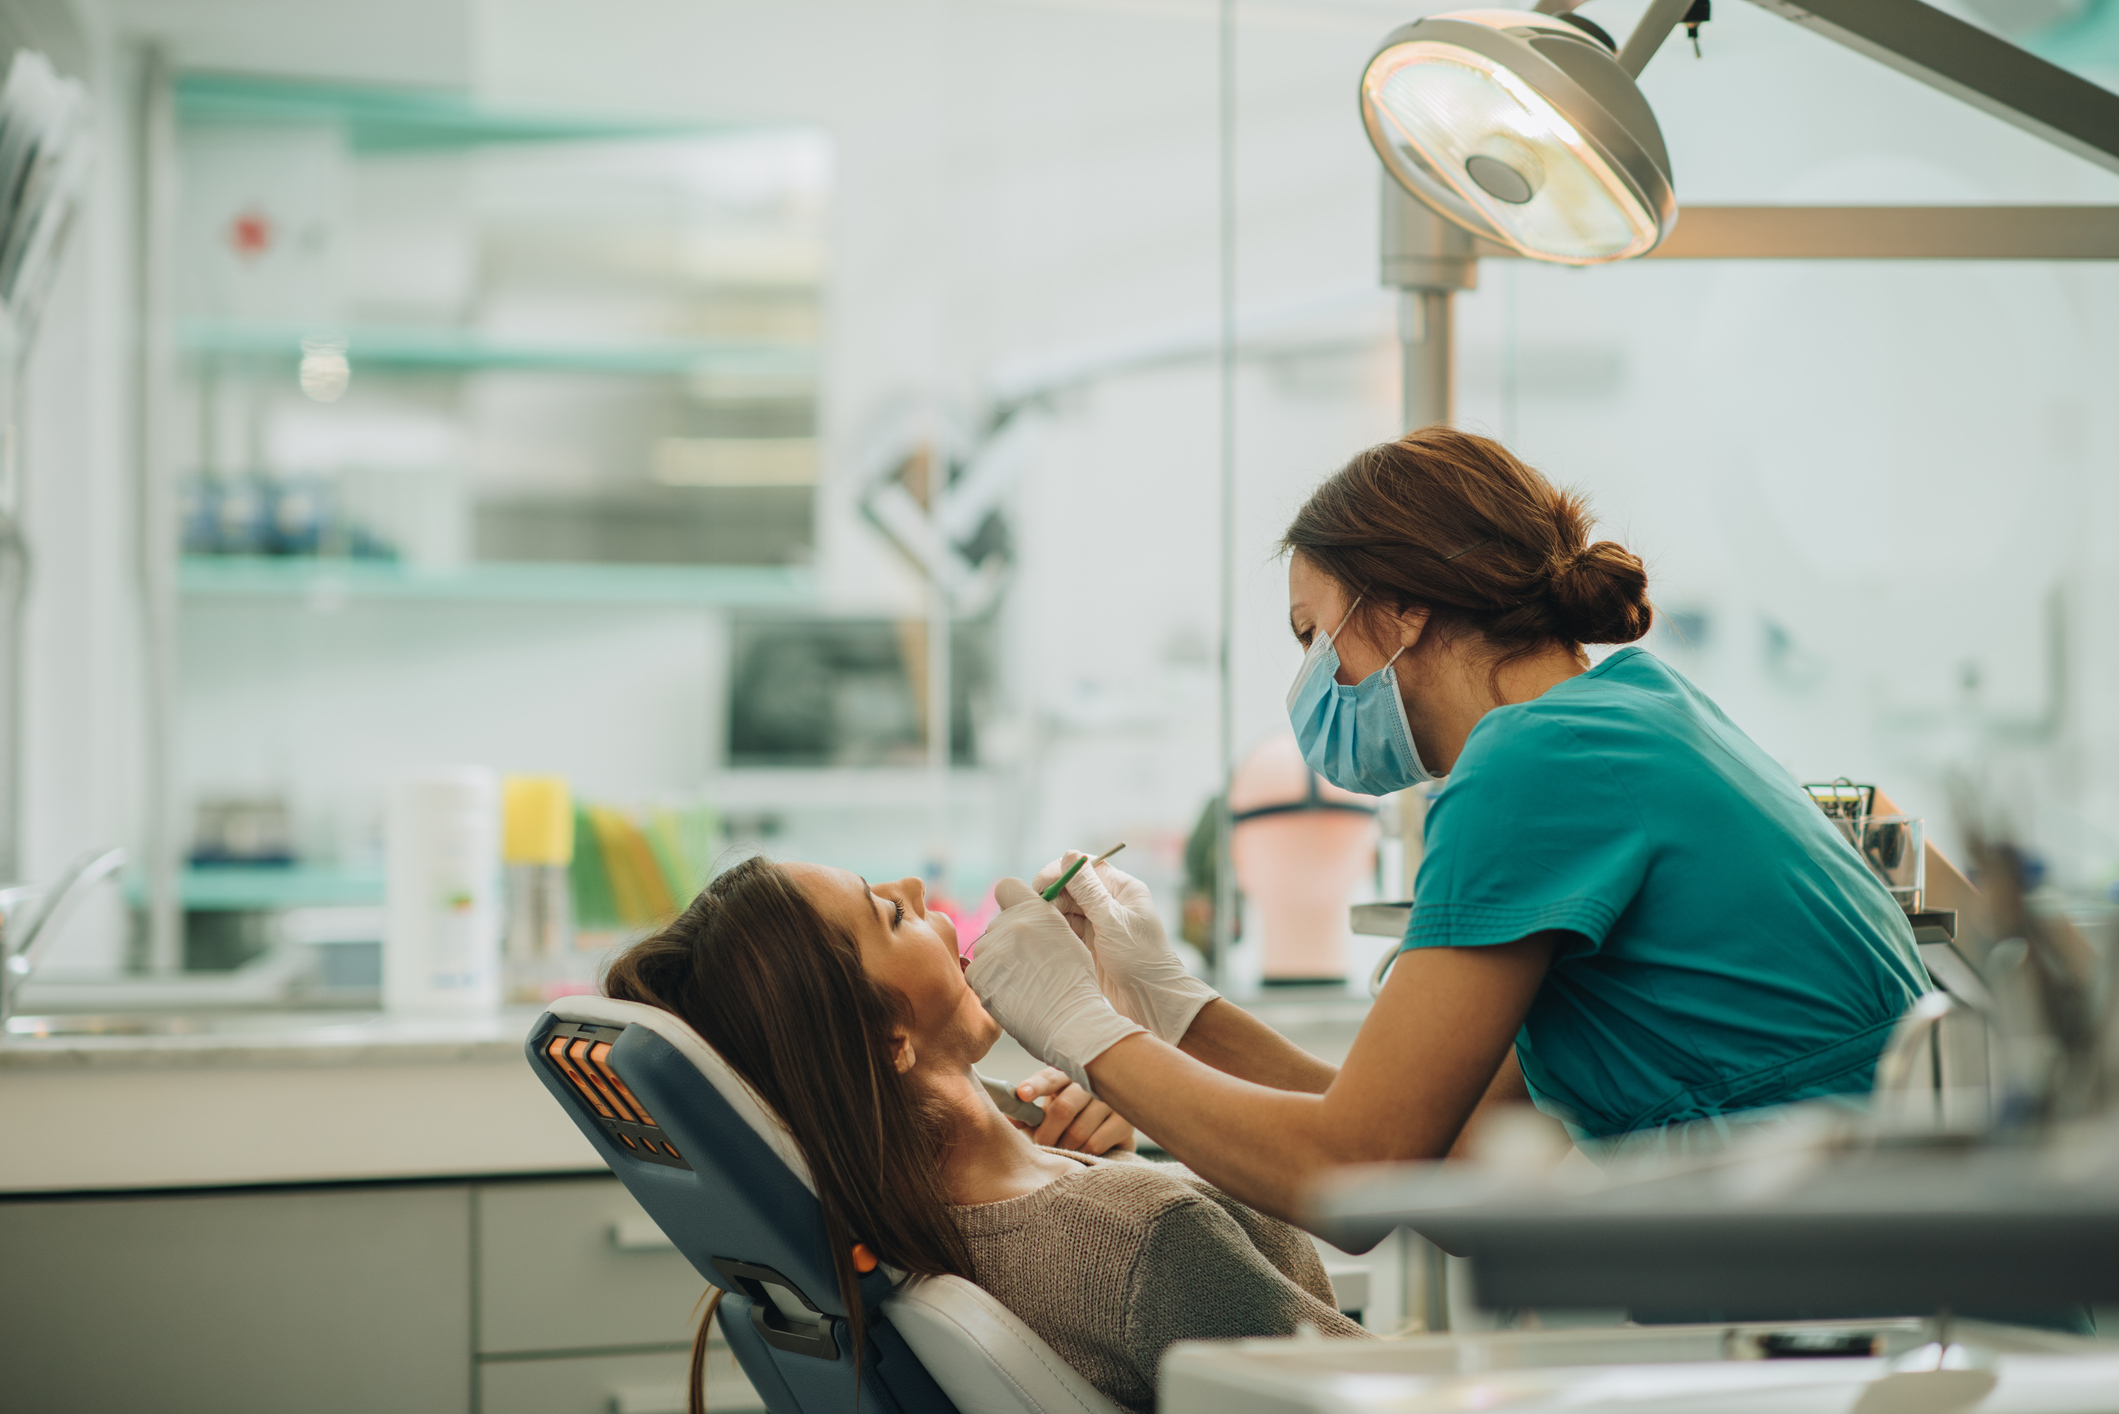 Dentist in scrubs examines a patient in a dental chair under an overhead light